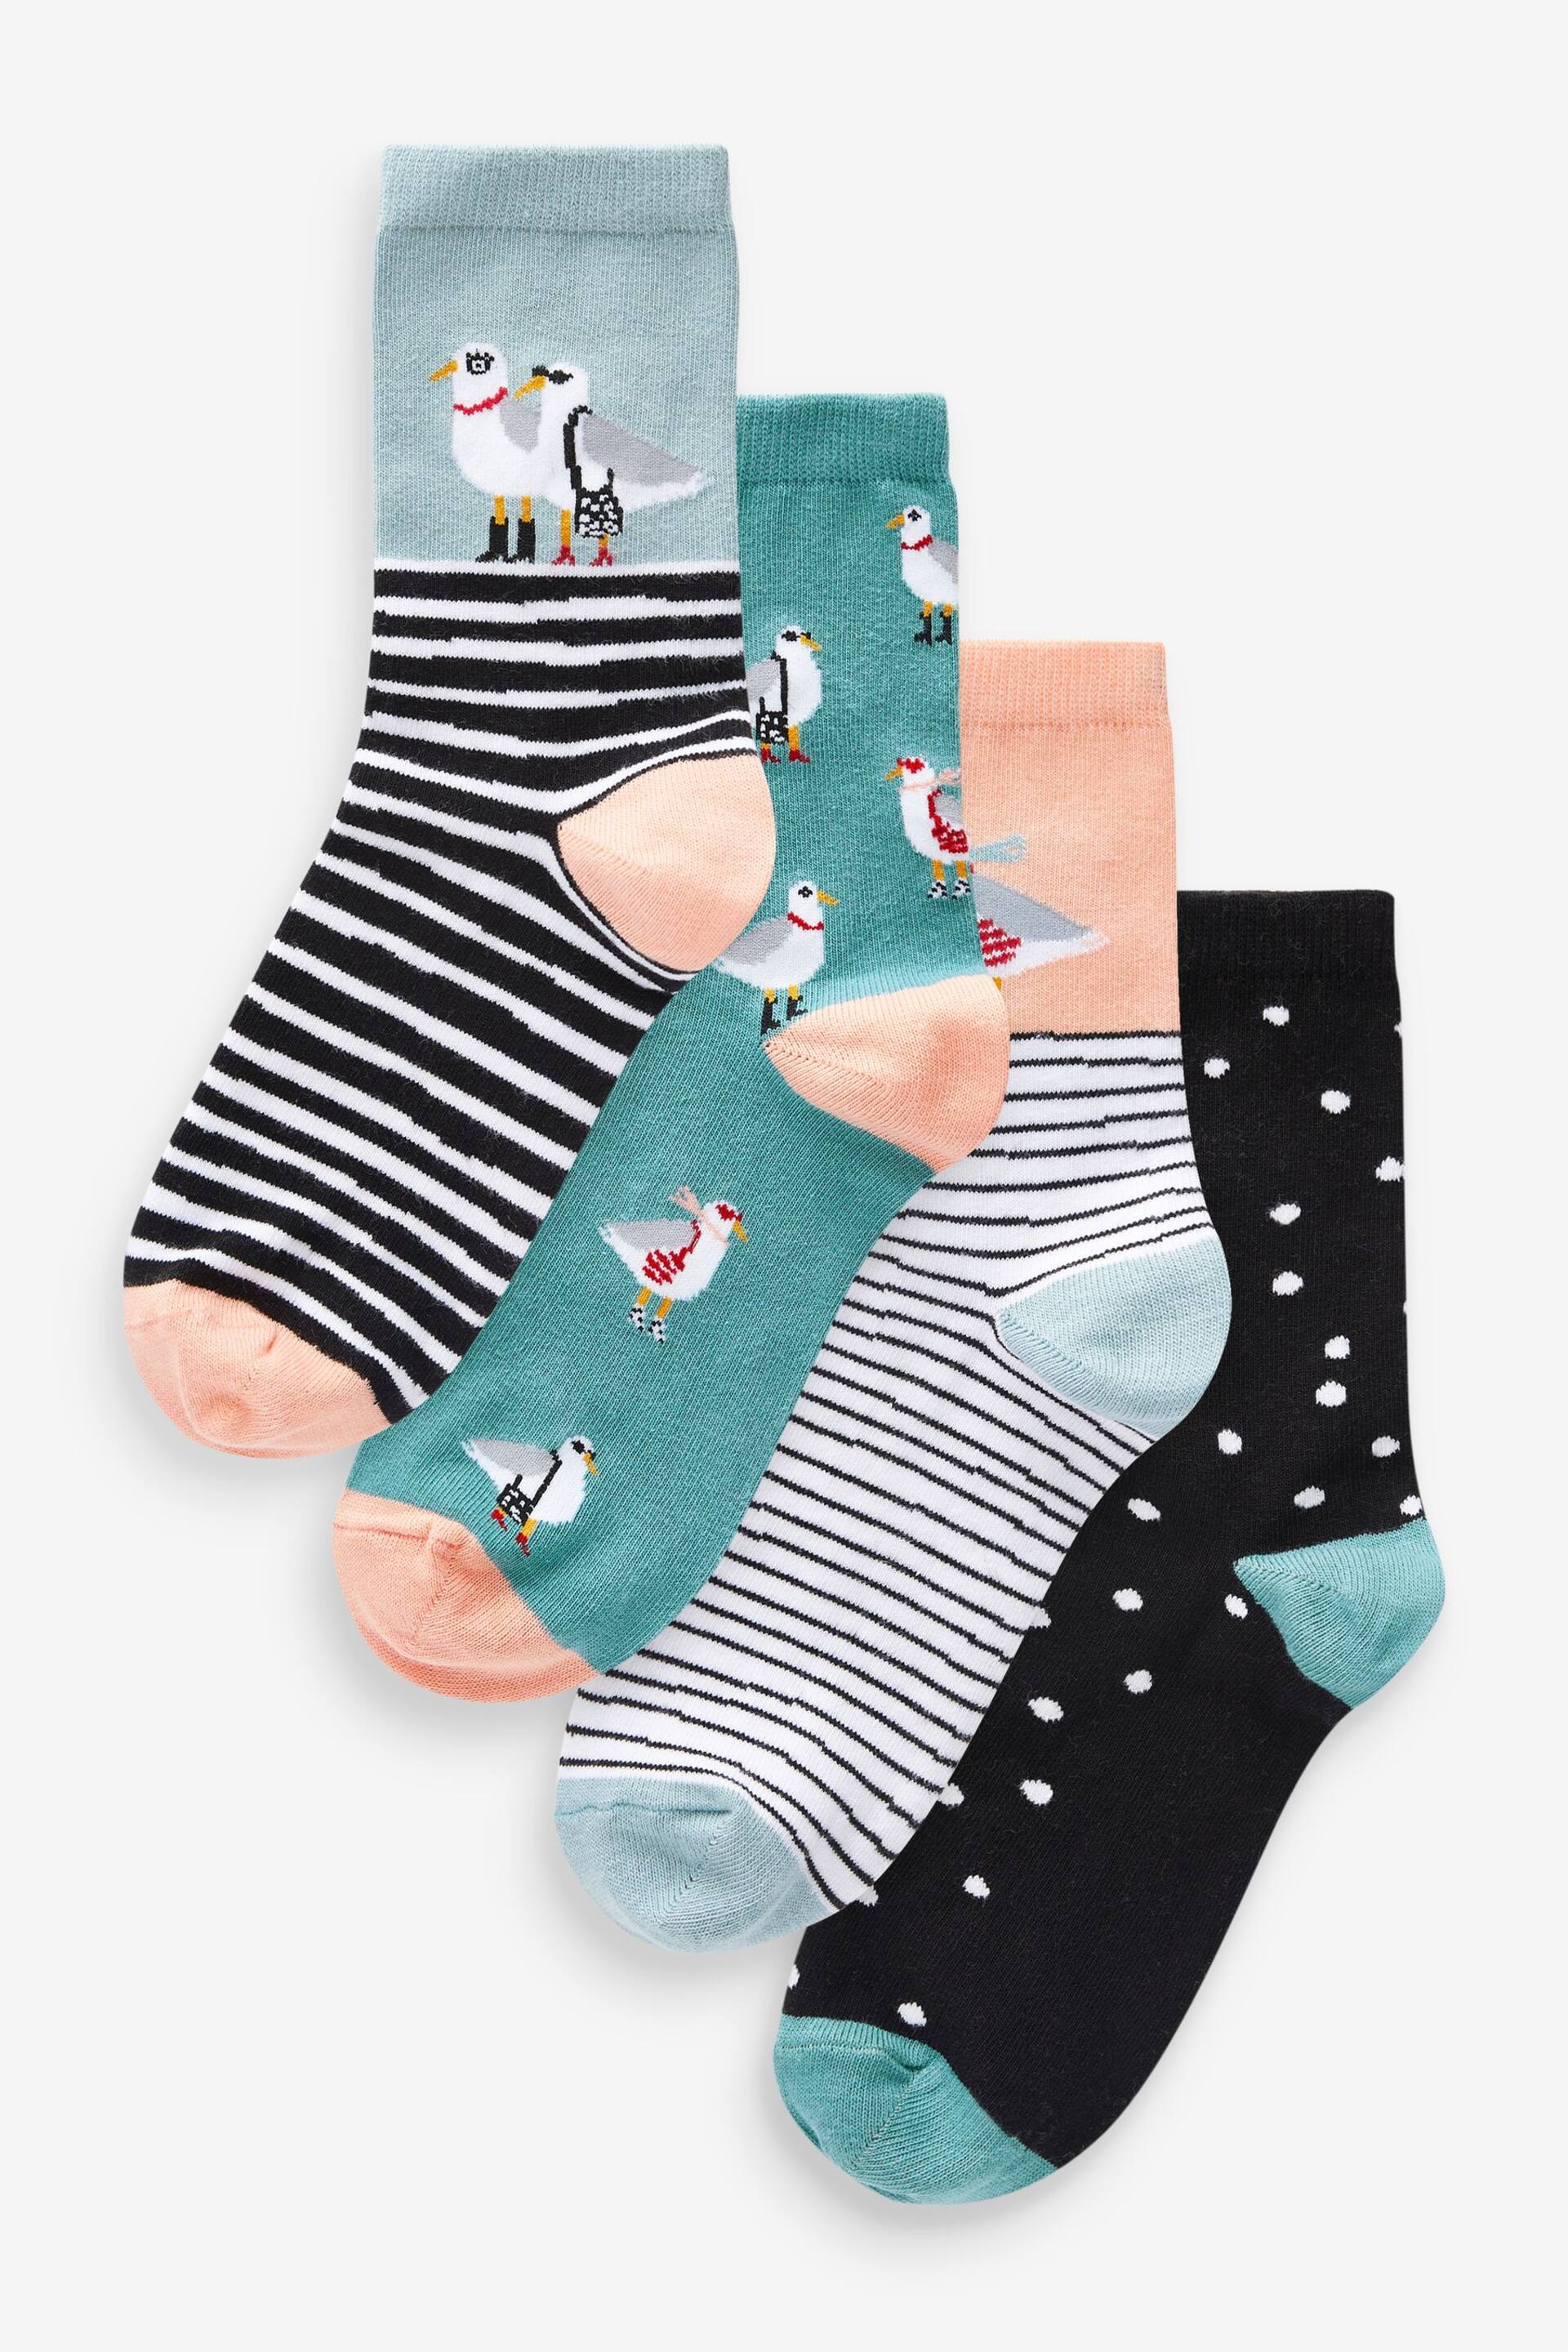 Birds With Handbags Pattern Ankle Socks 4 Pack - Image 1 of 1